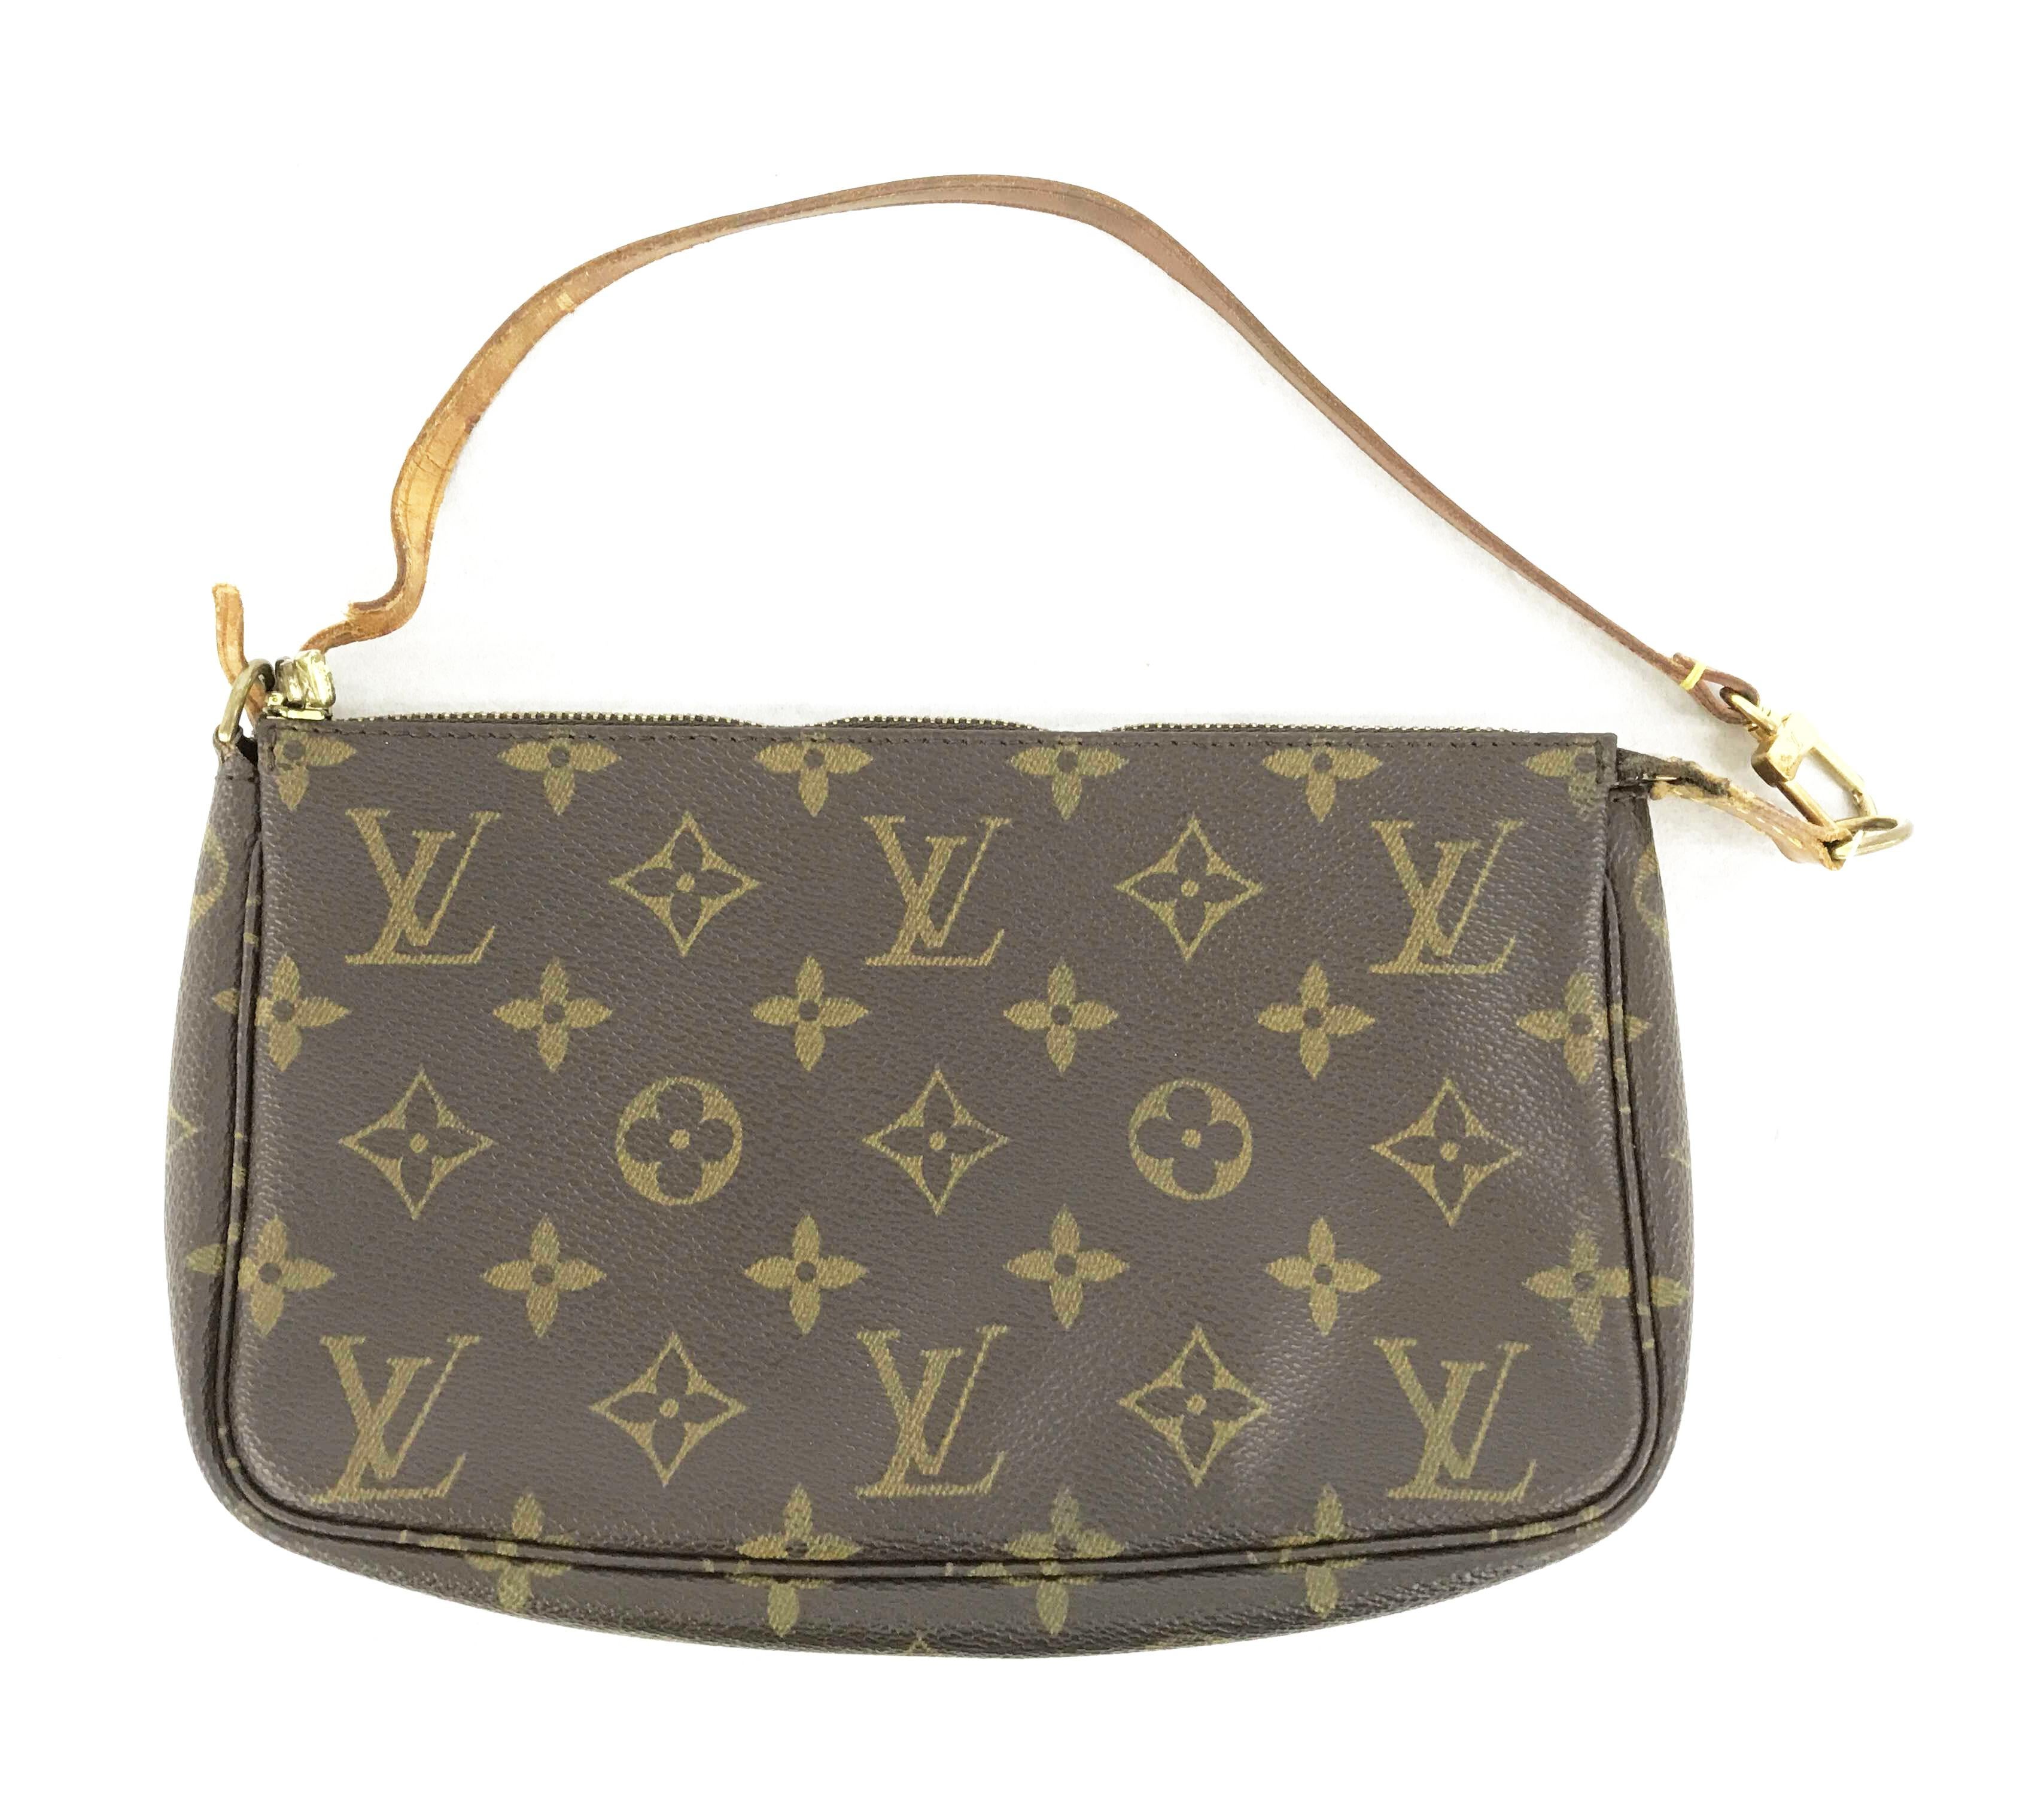 Brown and tan Monogram coated canvas Louis Vuitton Pochette Accessoires shoulder bag with gold-tone hardware, tan Vachetta leather trim, a tan leather shoulder strap, brown canvas lining and zip closure at top.


70361MSC